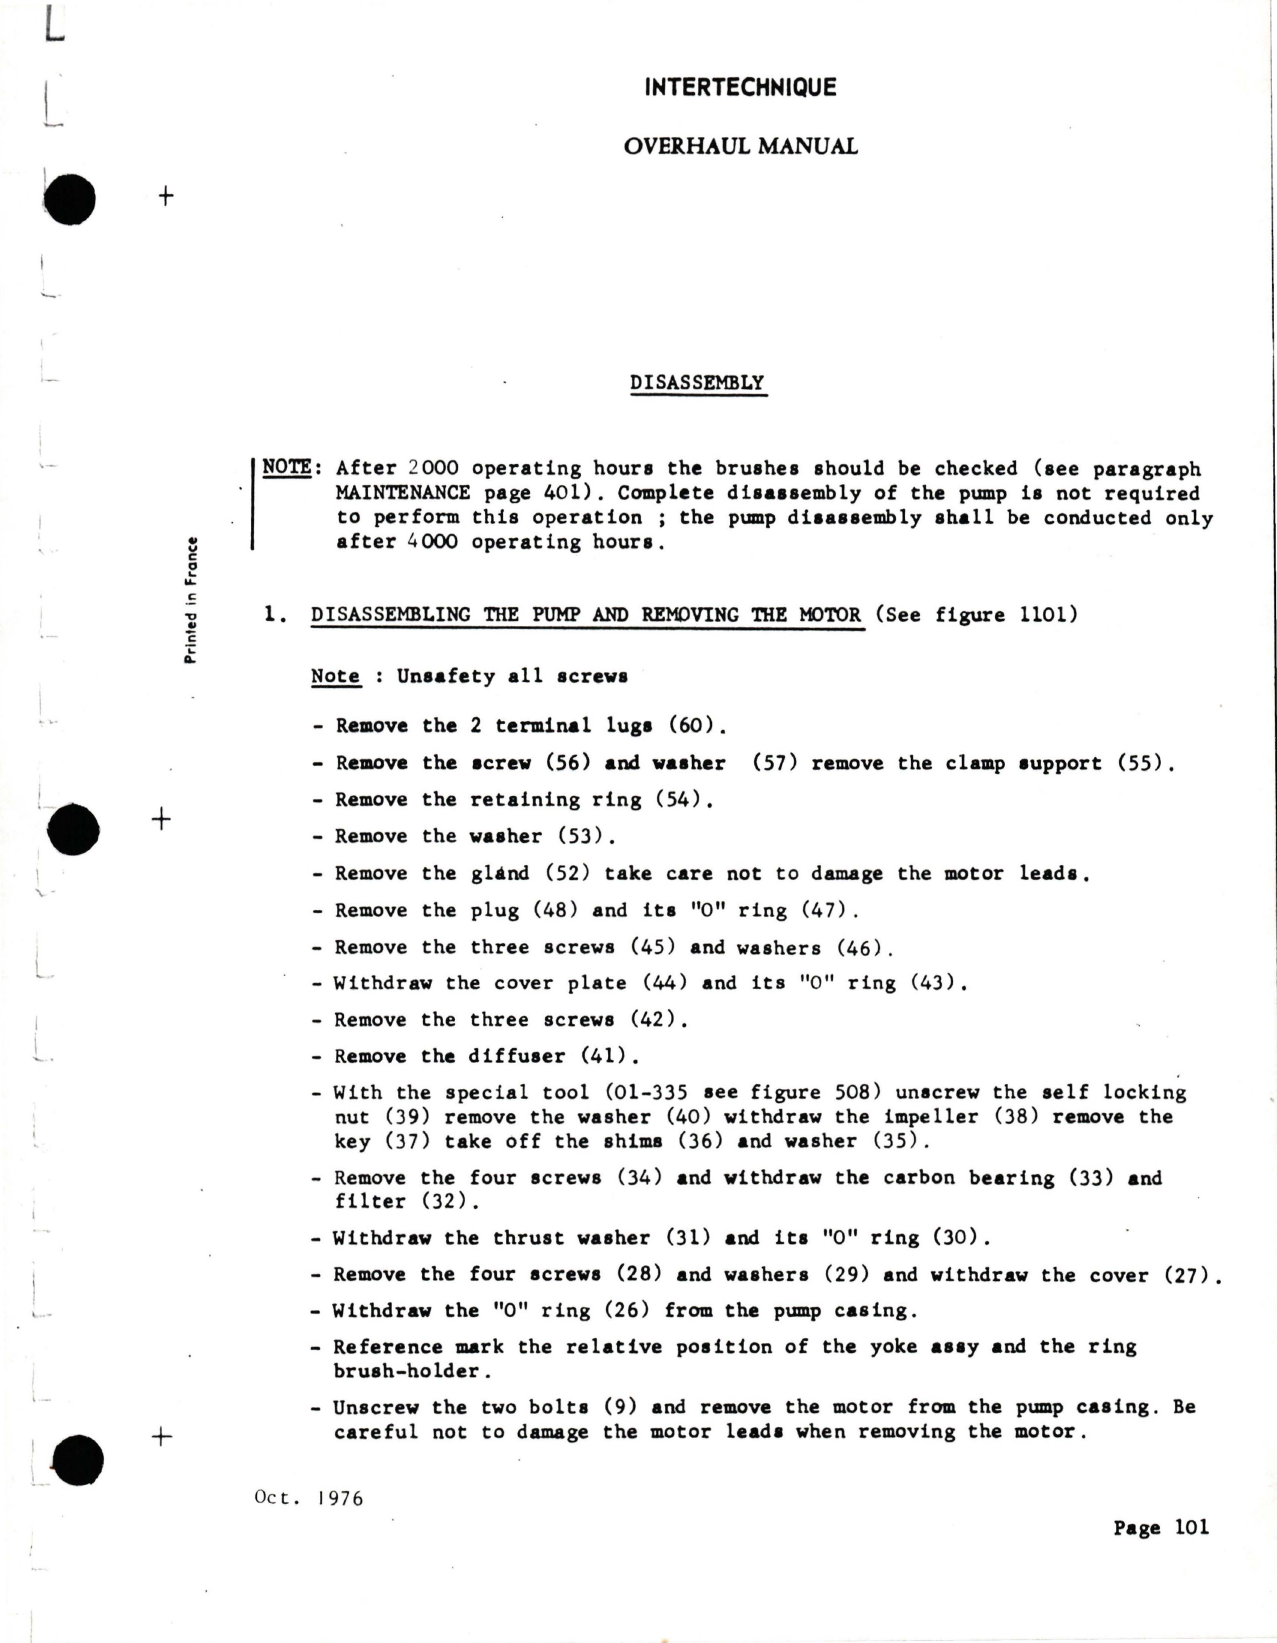 Sample page 9 from AirCorps Library document: Overhaul Manual for Submerged Electrically Driven Fuel Pump - Part 2070-C-01